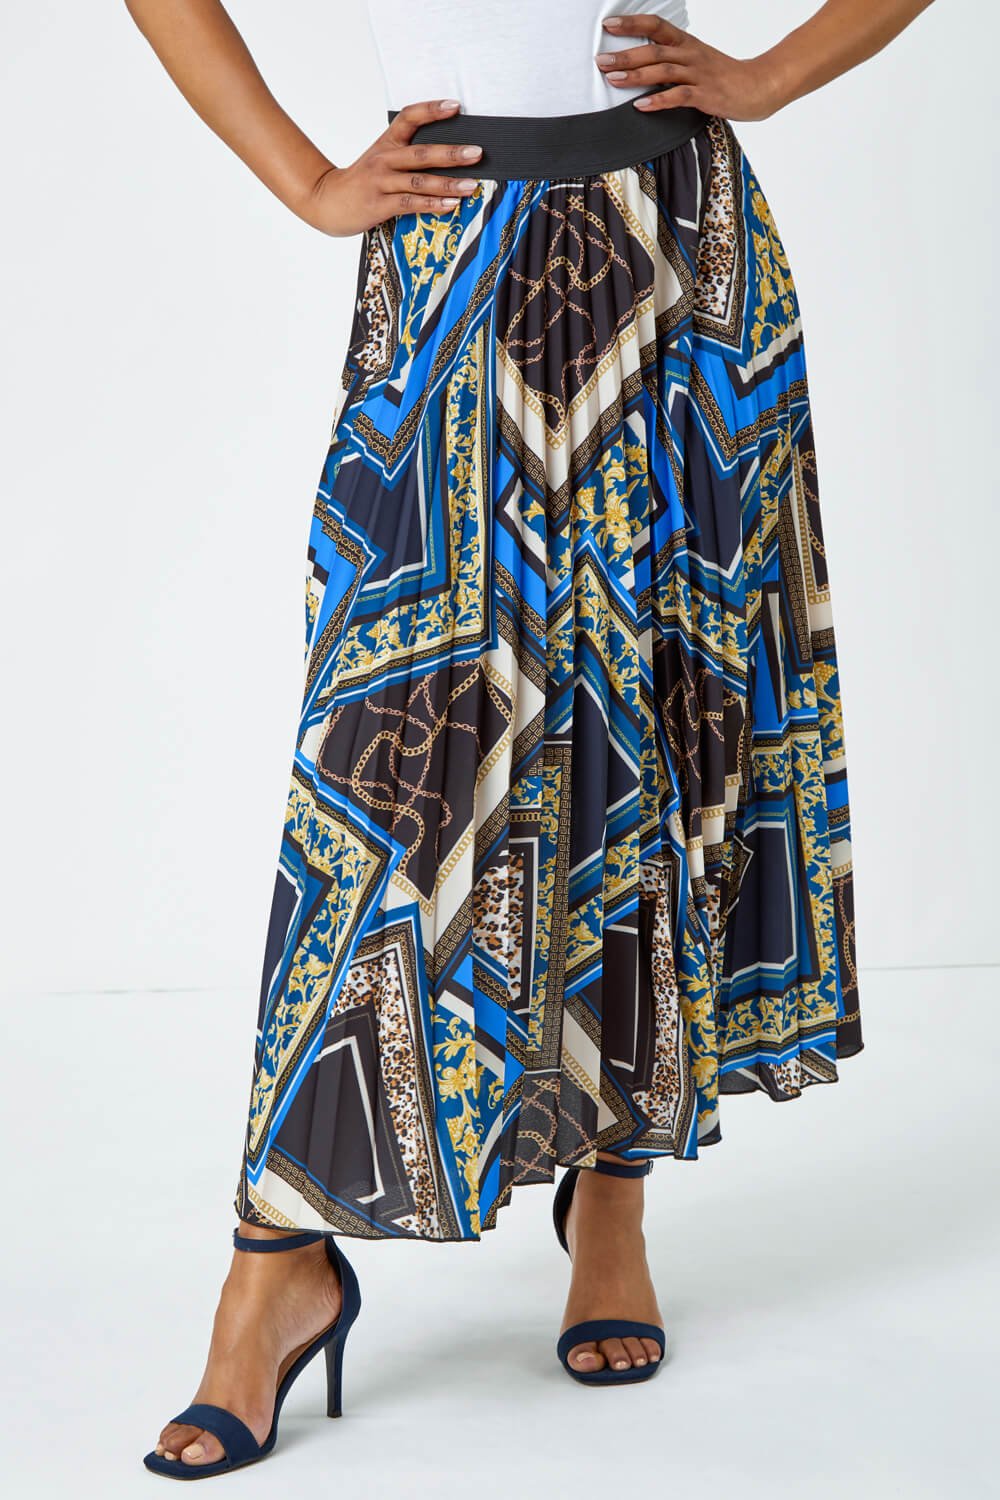 Royal Blue Petite Abstract Animal Pleated Maxi Skirt, Image 5 of 5